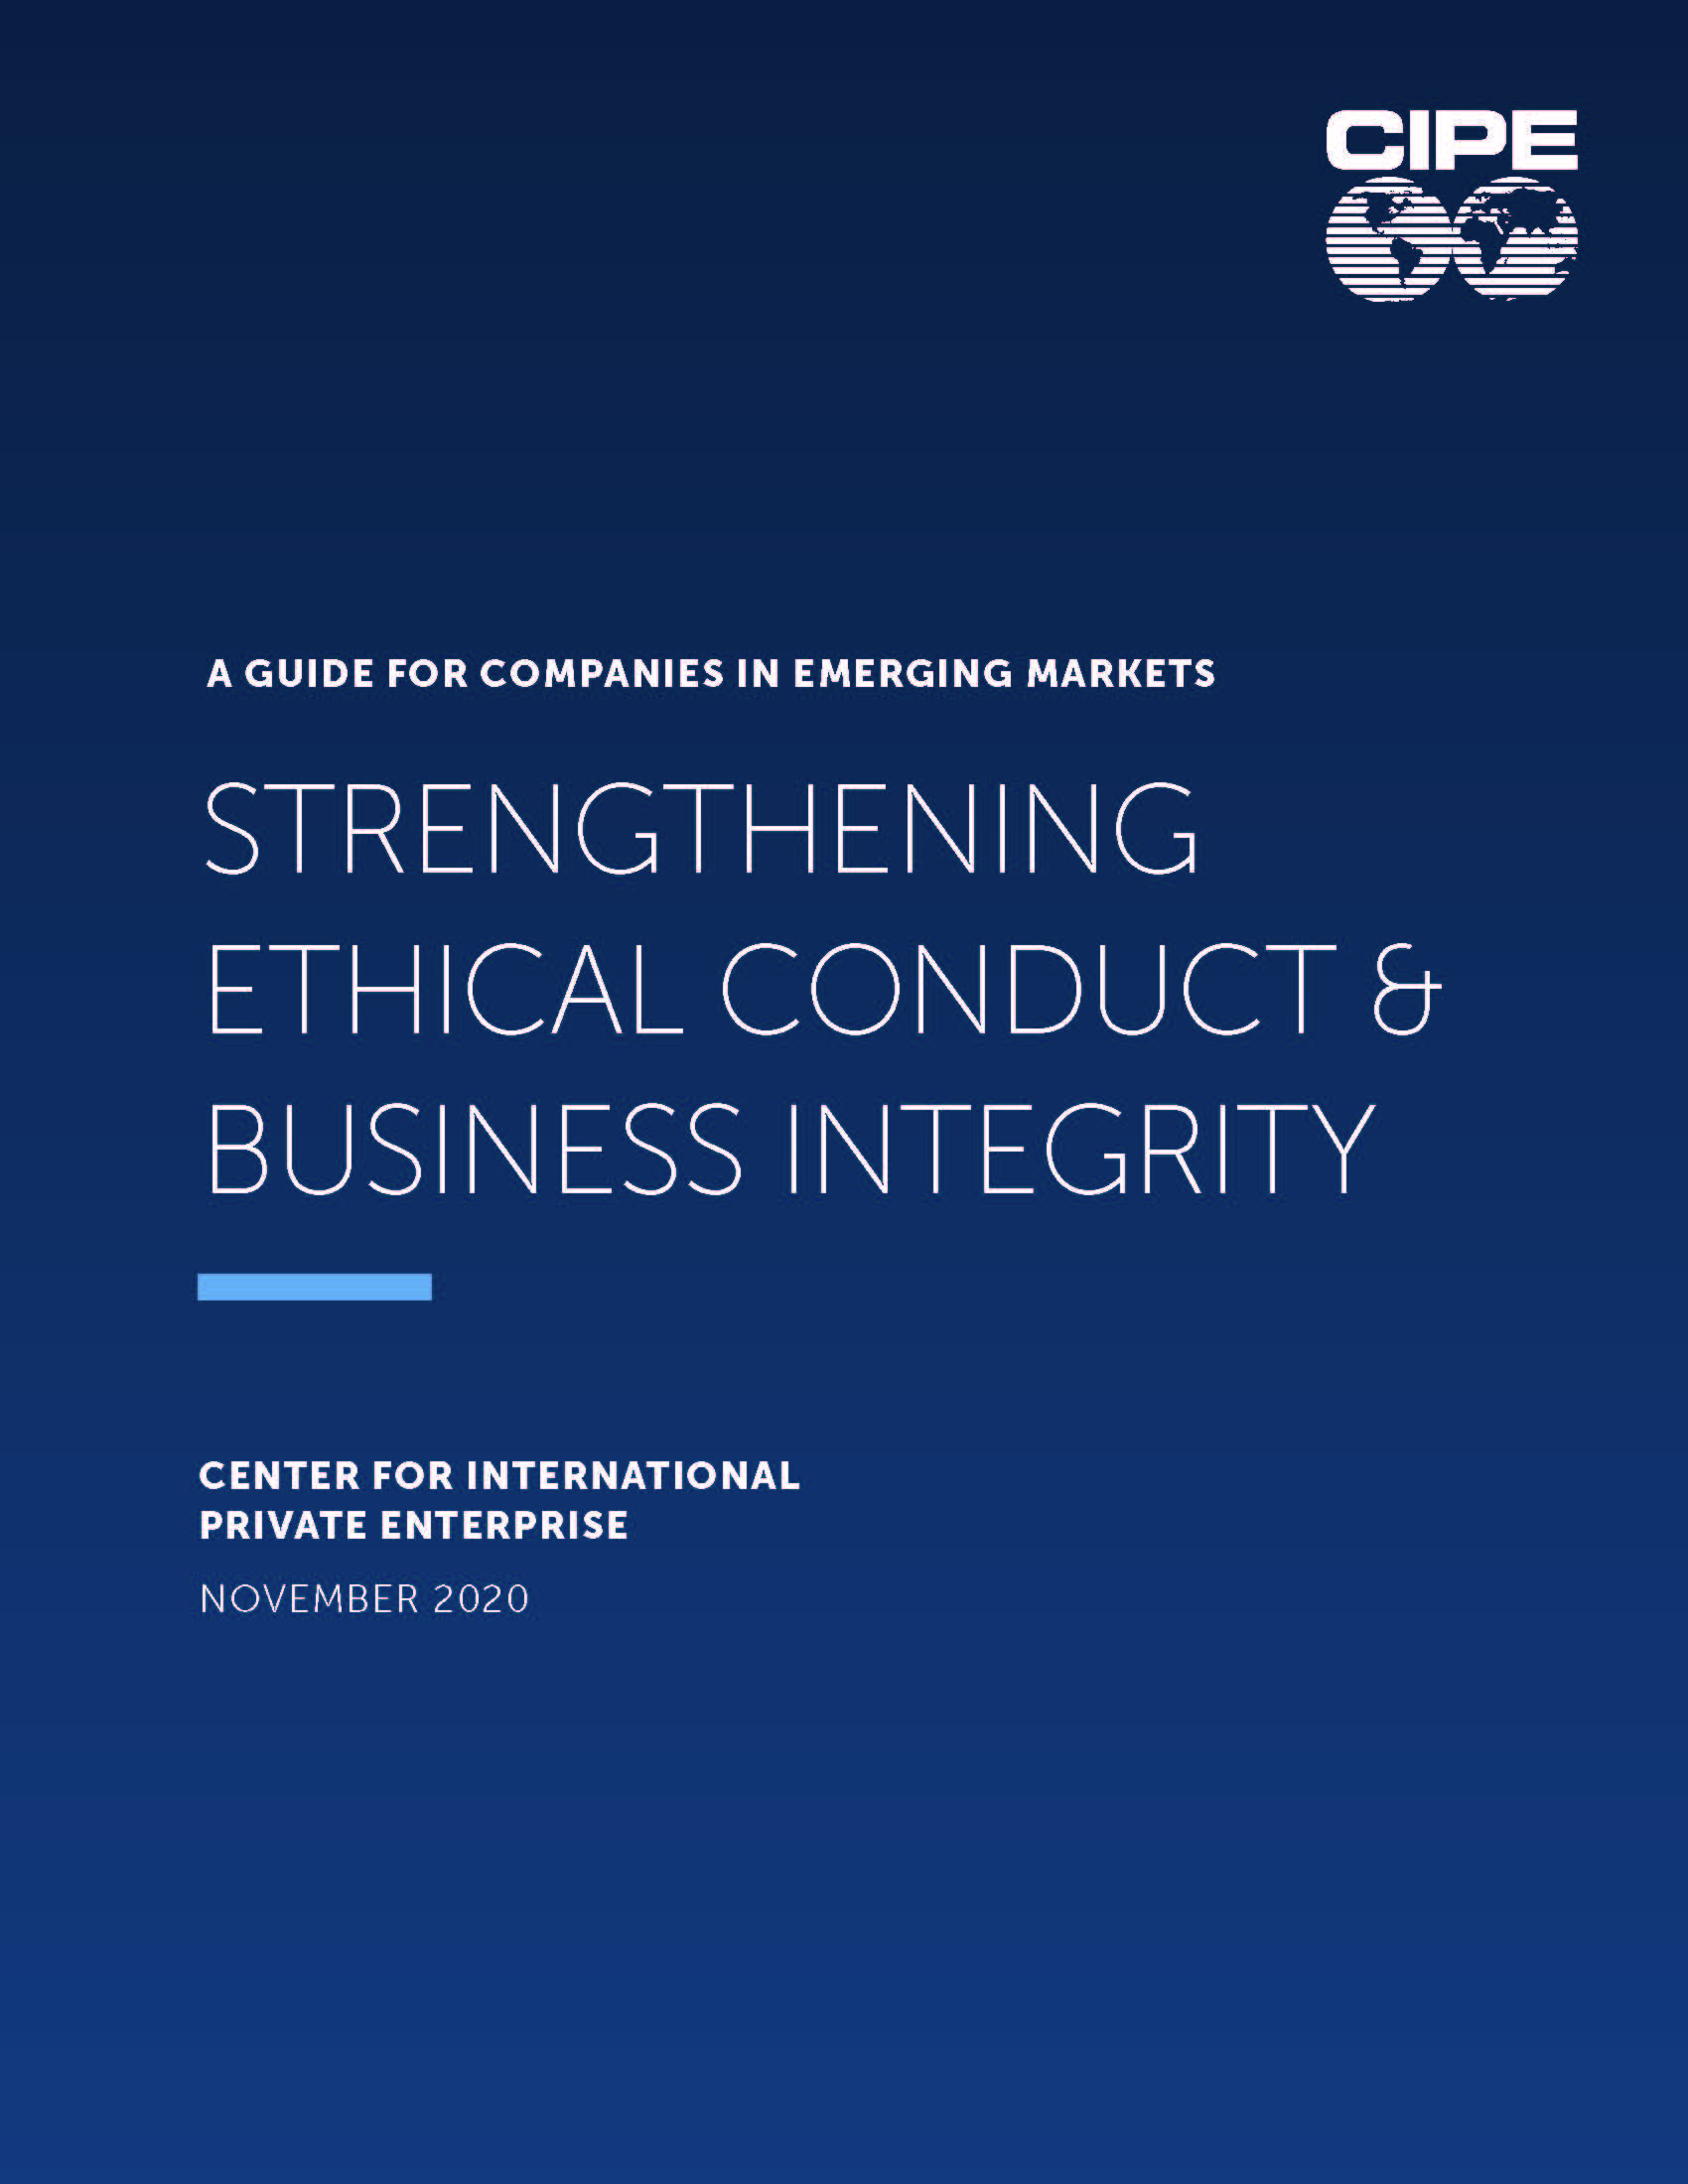 CIPE guide - Strengthening ethical conduct and business integrity